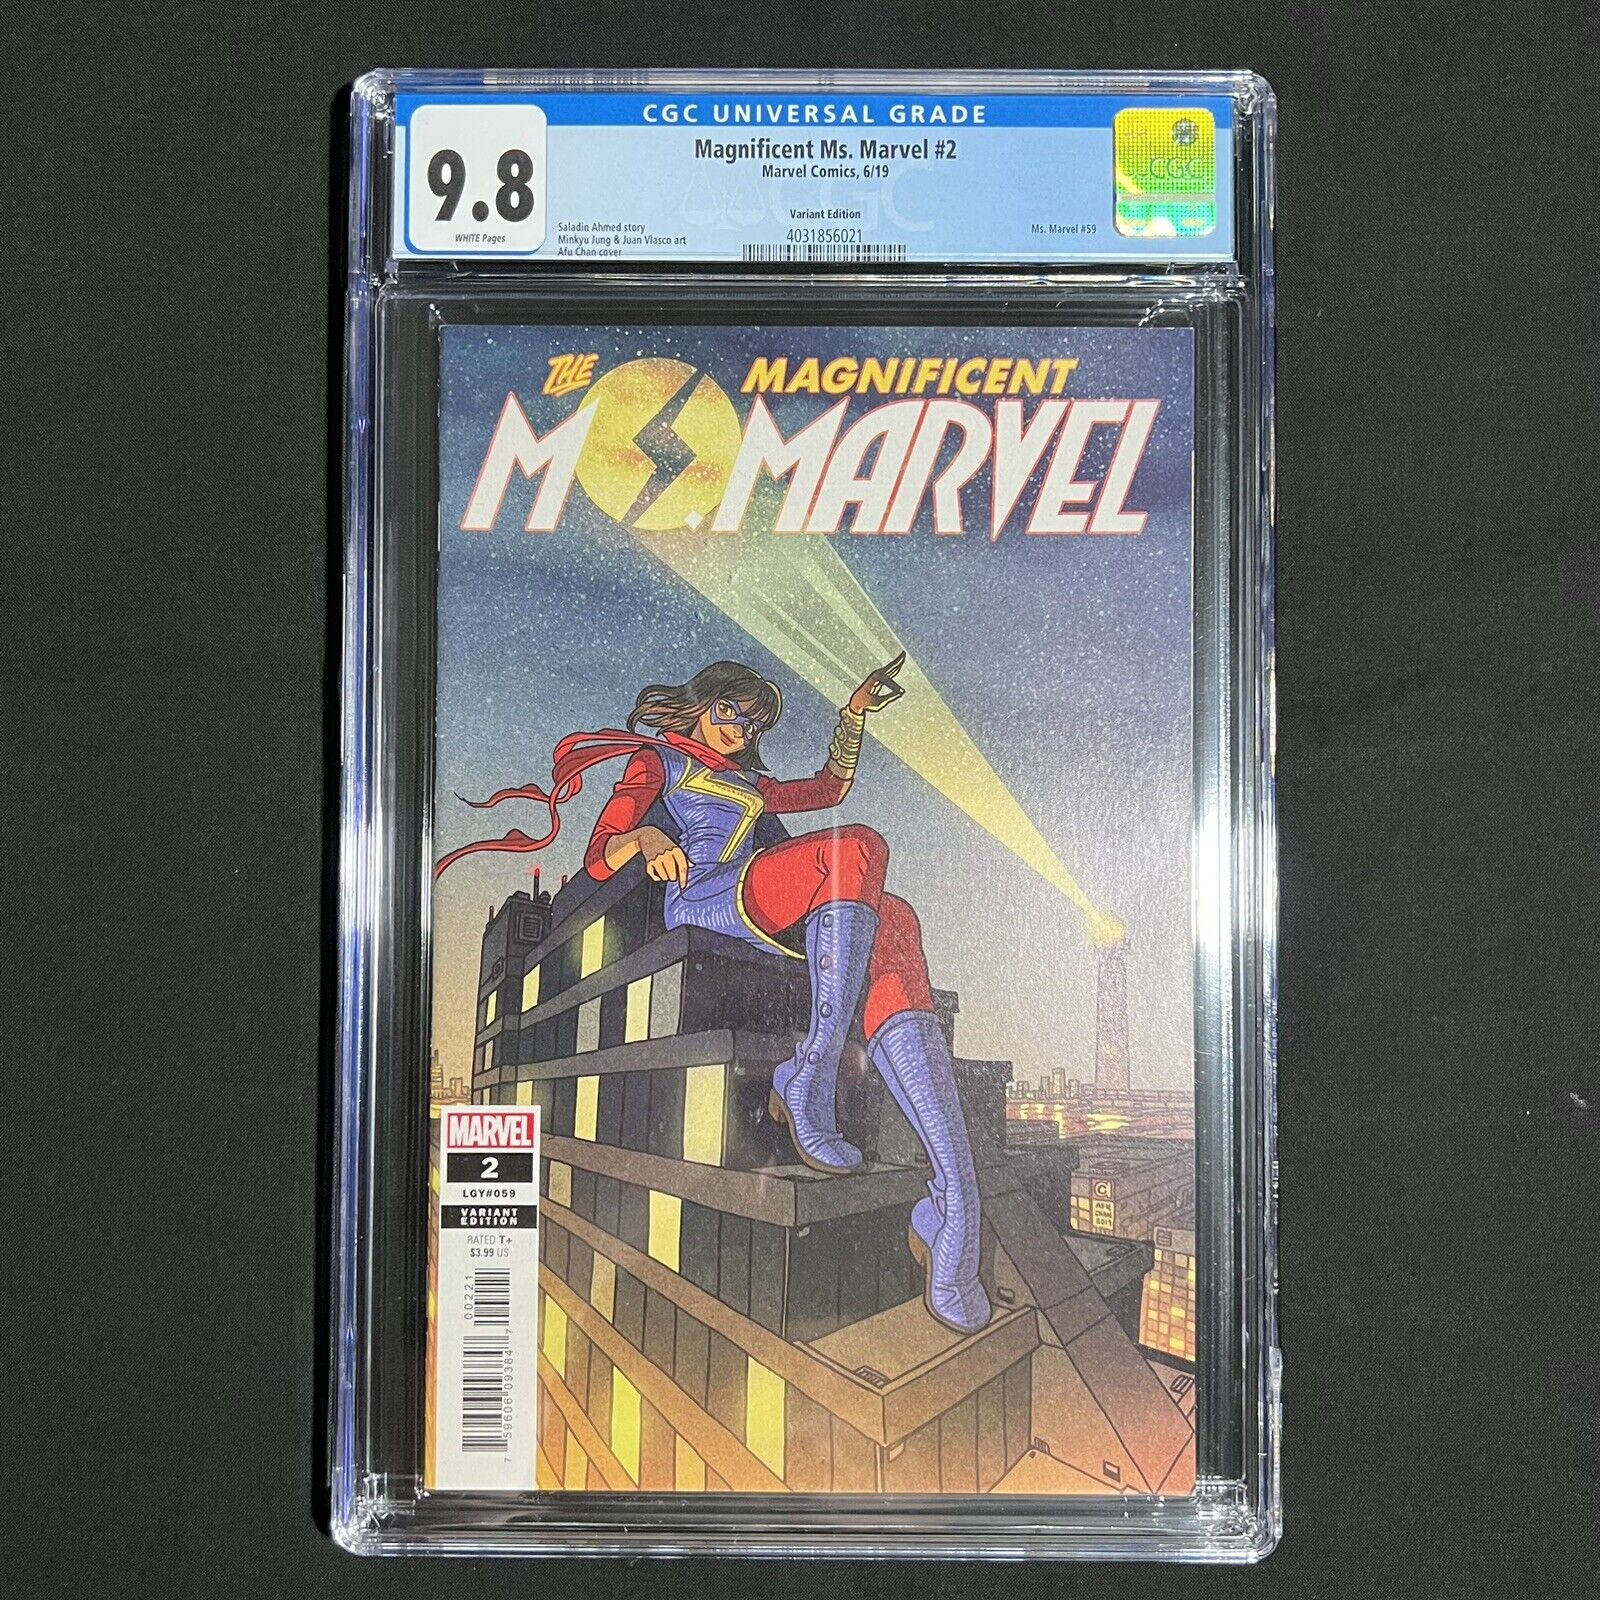 Magnificent Ms Marvel #2 CGC 9.8 Chan 1:15 Variant, The Marvels